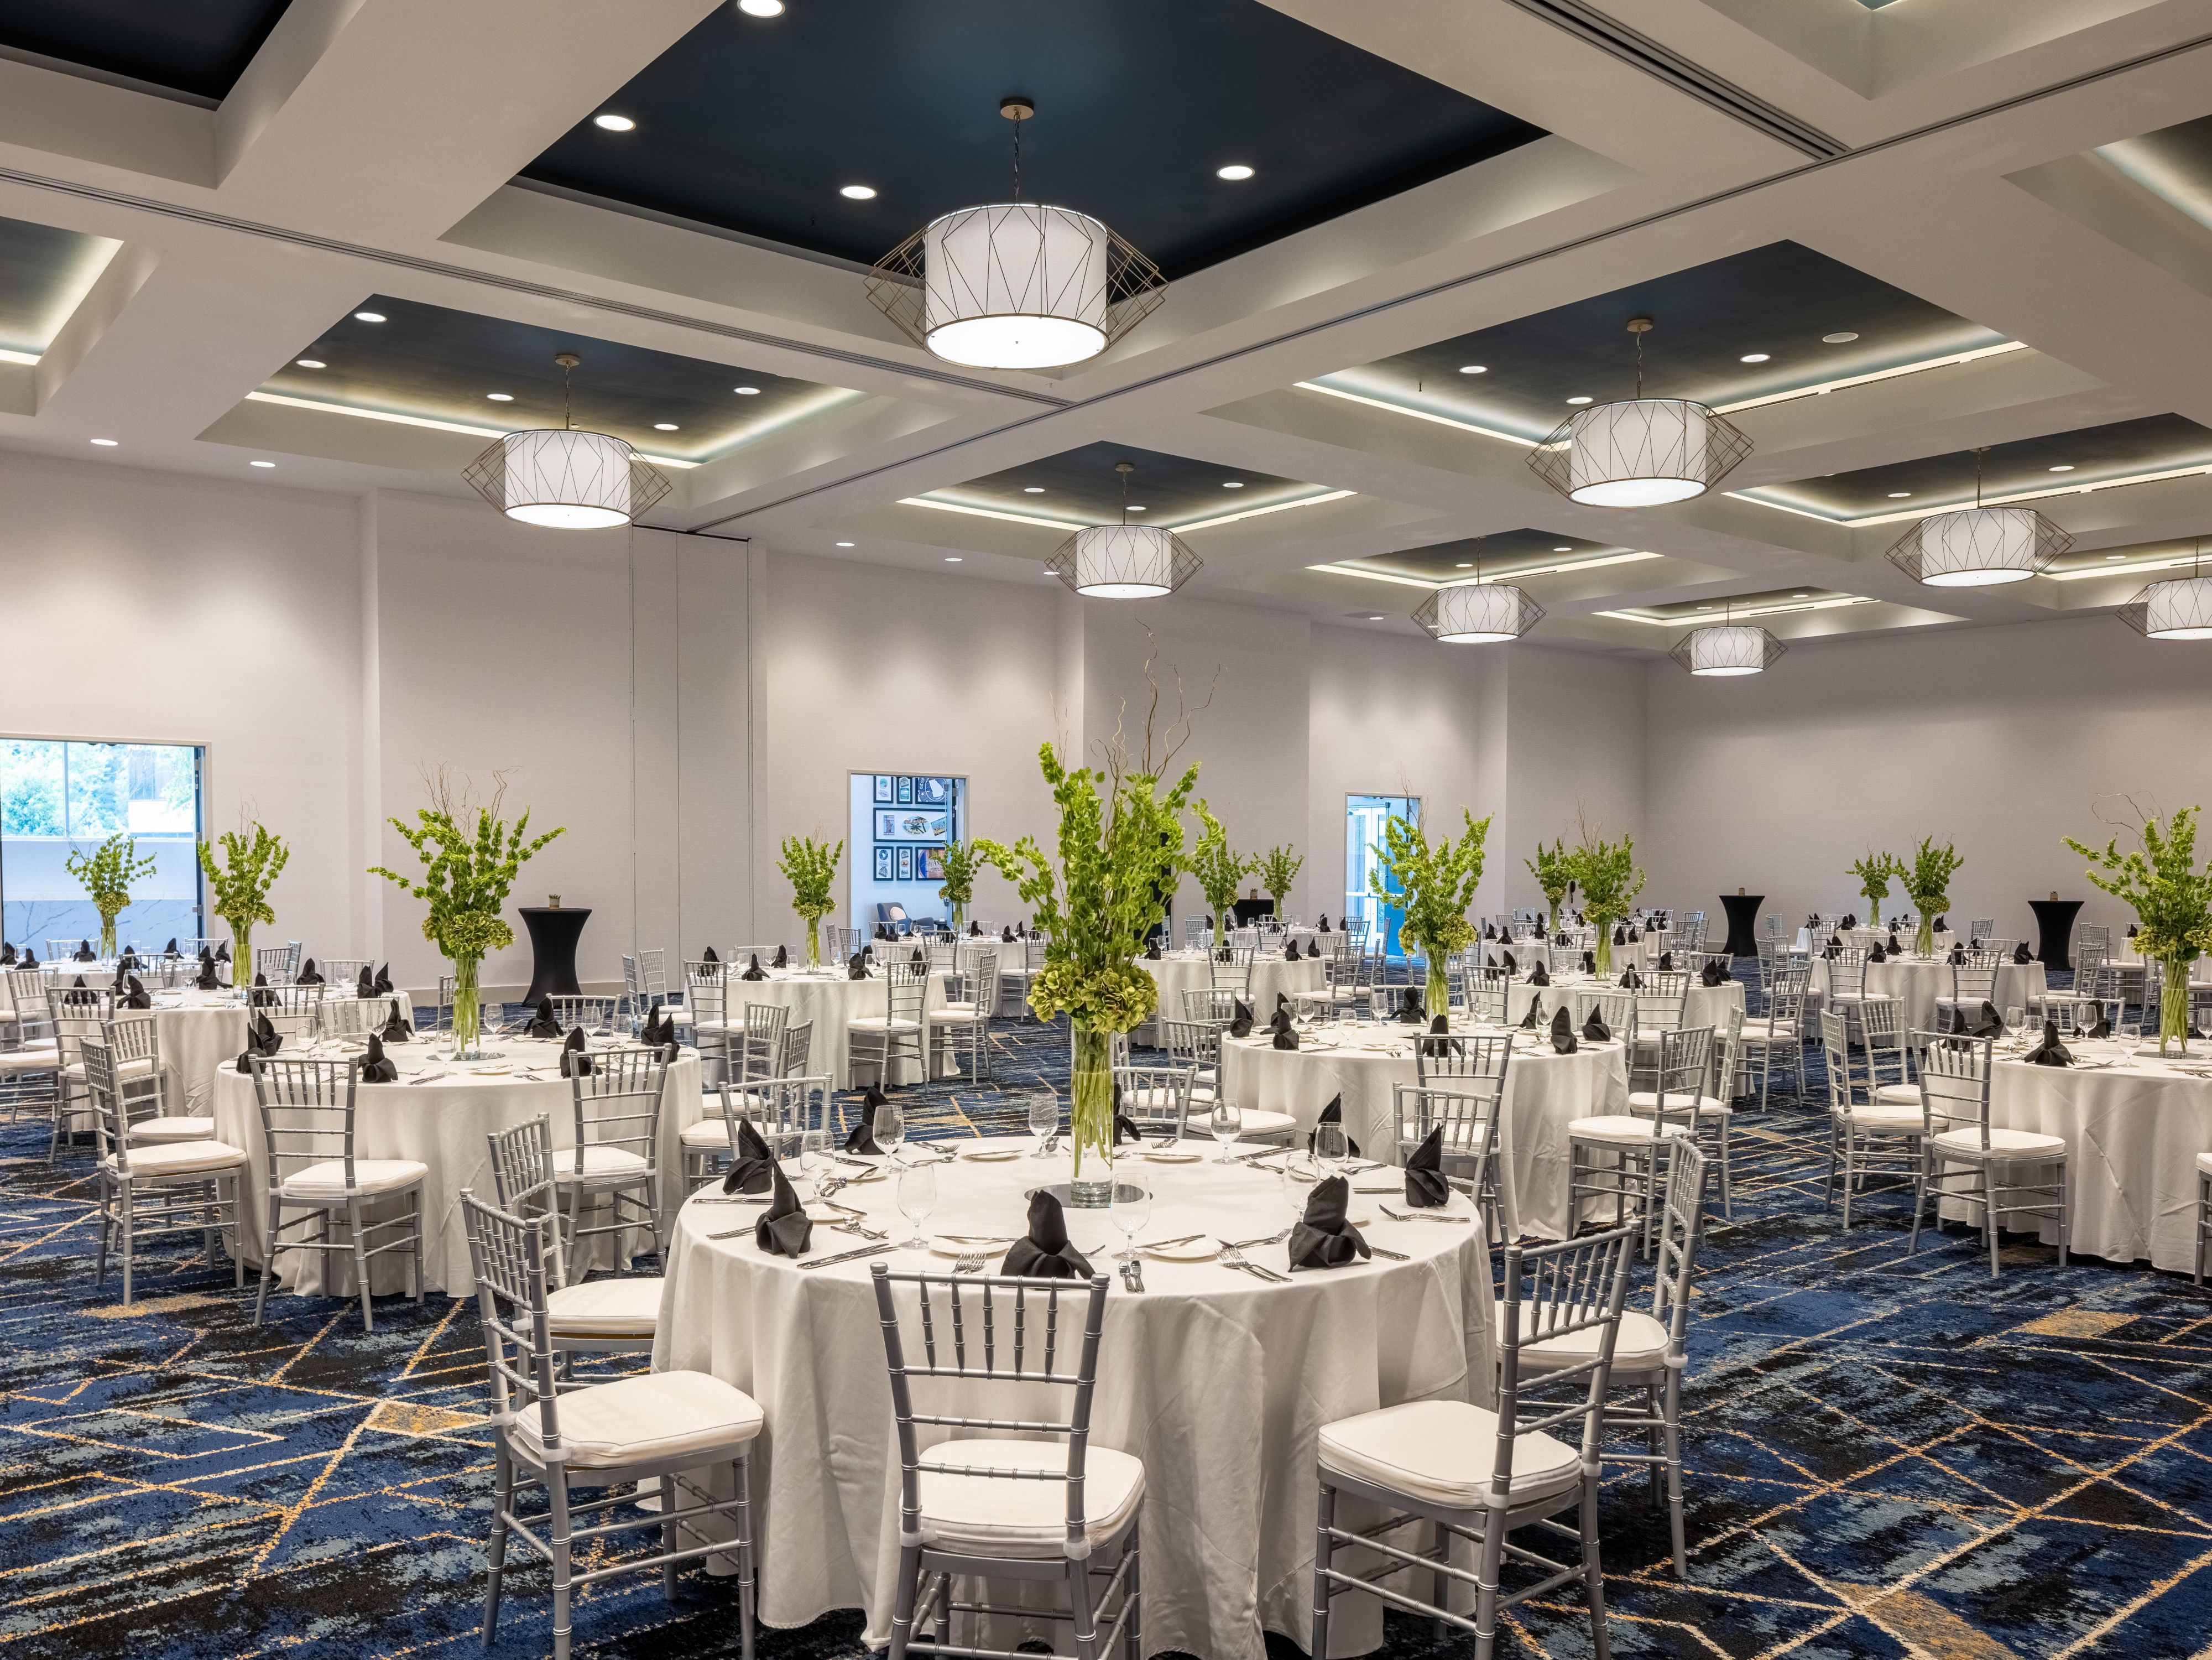 If you need to host a banquet, convention, wedding, or meeting, we offer seven flexible meeting spaces to pick from. Host a banquet for 500 guests in our Richmond Grand Ballroom or gather with coworkers for an impromptu meeting in The Boardroom. Our in-house catering and event planners will help you pull it all off. 